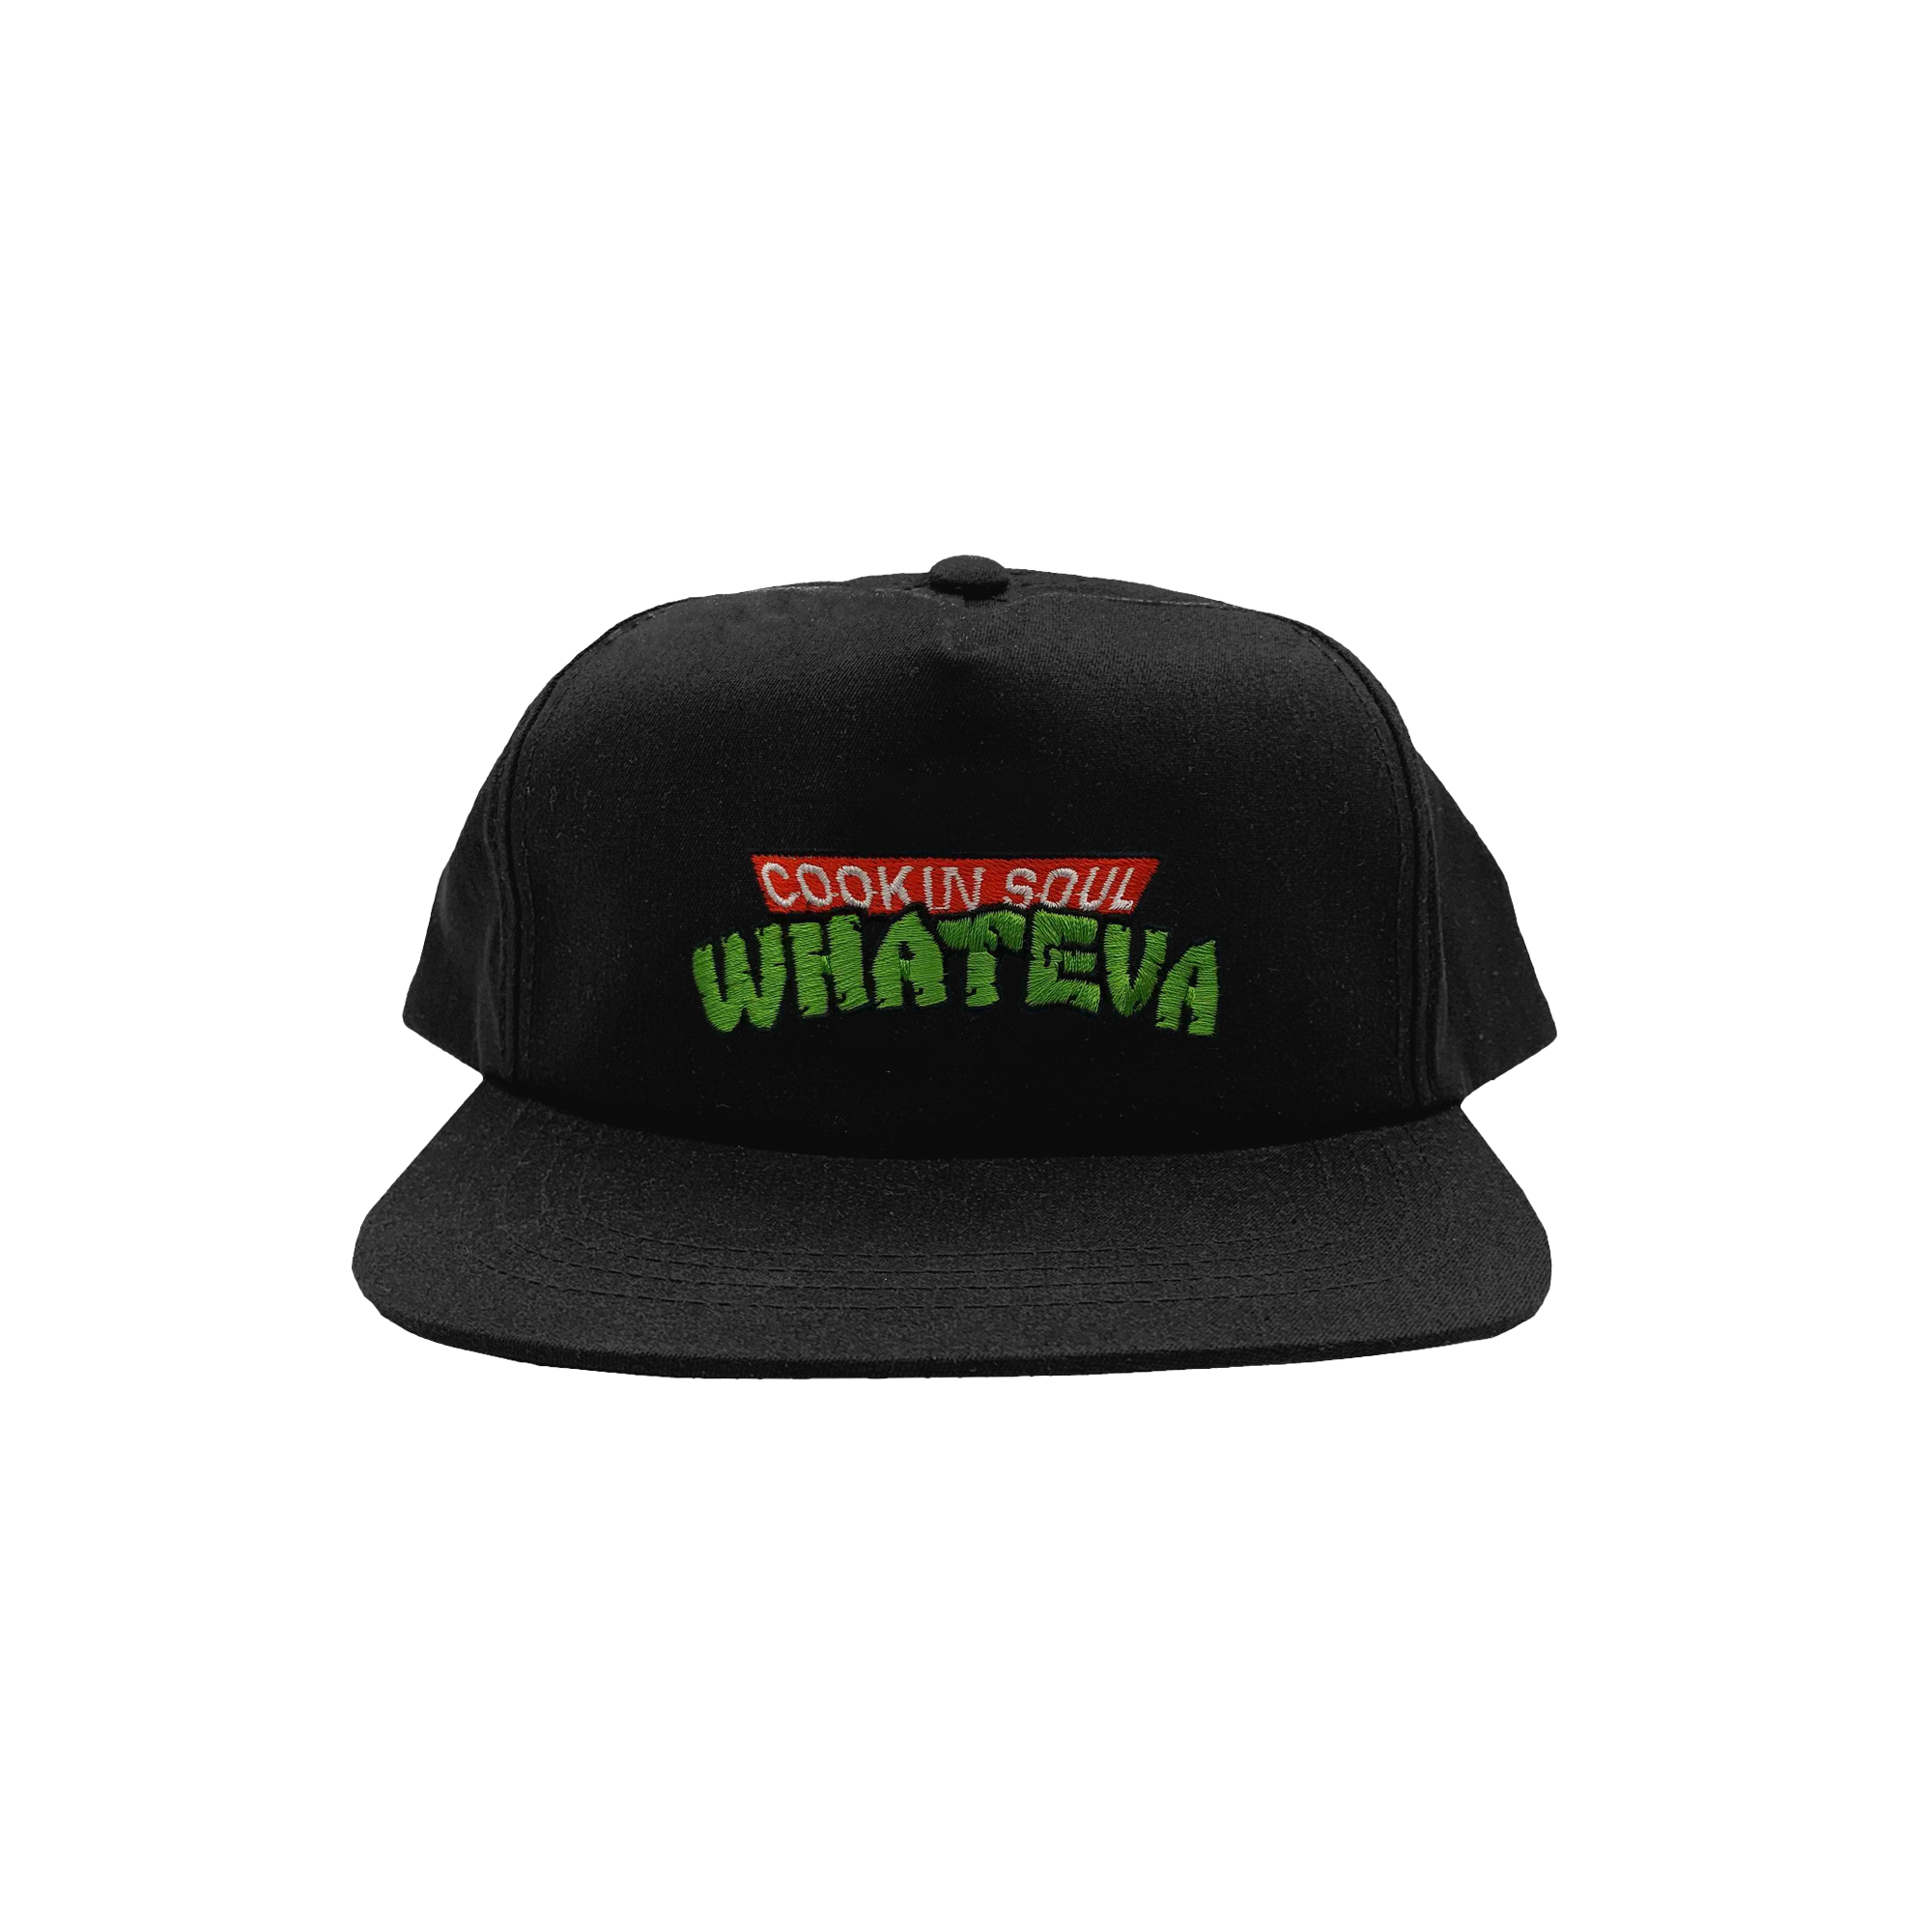 Whateva (Embroidered Black 5-Panel Hat) – Cookin Soul Records